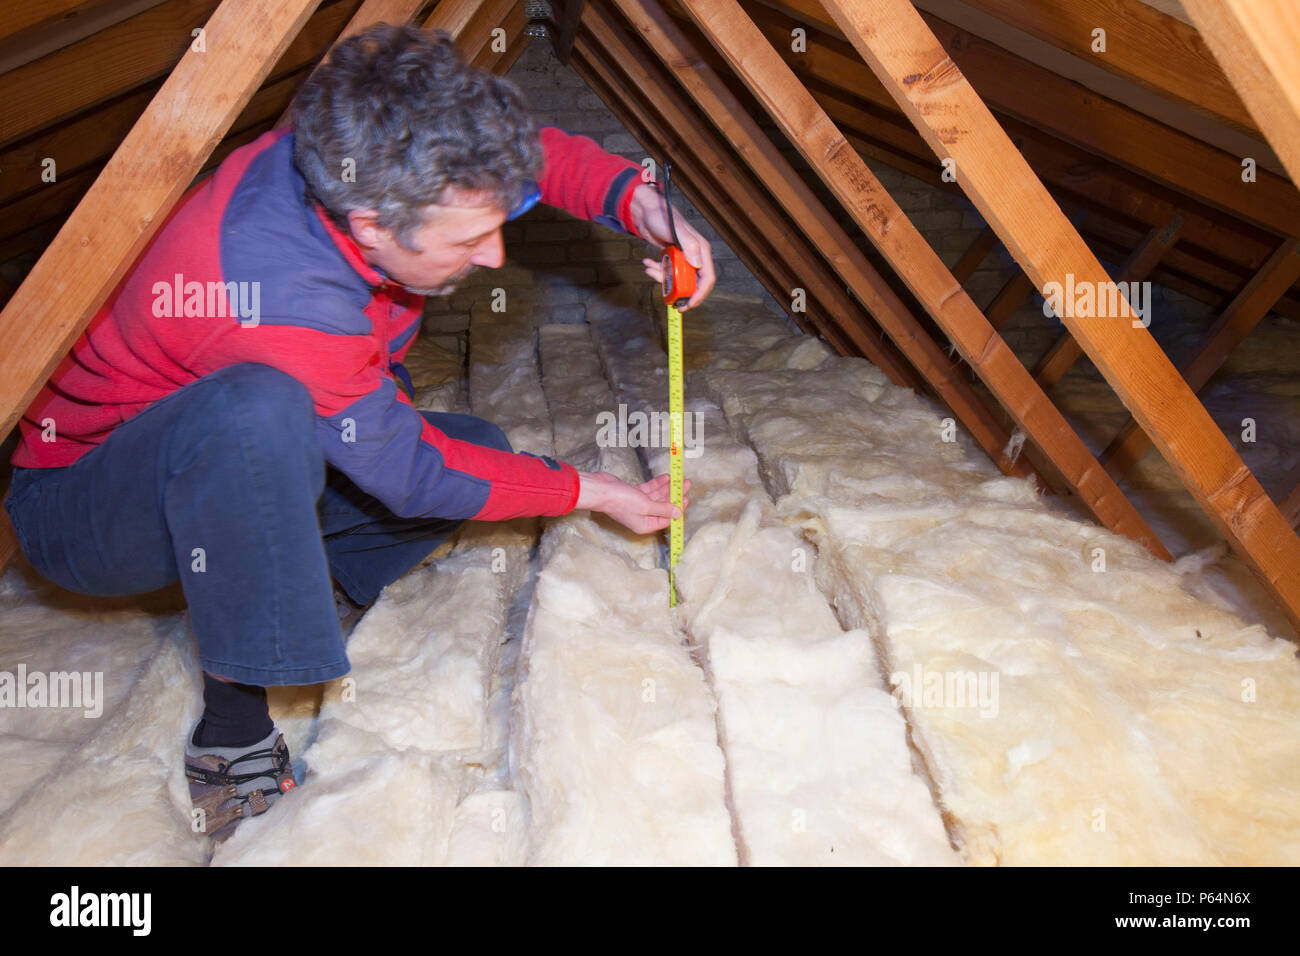 https://c8.alamy.com/comp/P64N6X/a-man-measuring-the-depth-of-insulation-in-a-house-loft-or-roof-space-insulating-your-loft-can-save-a-significant-amount-of-household-heat-loss-and-t-P64N6X.jpg